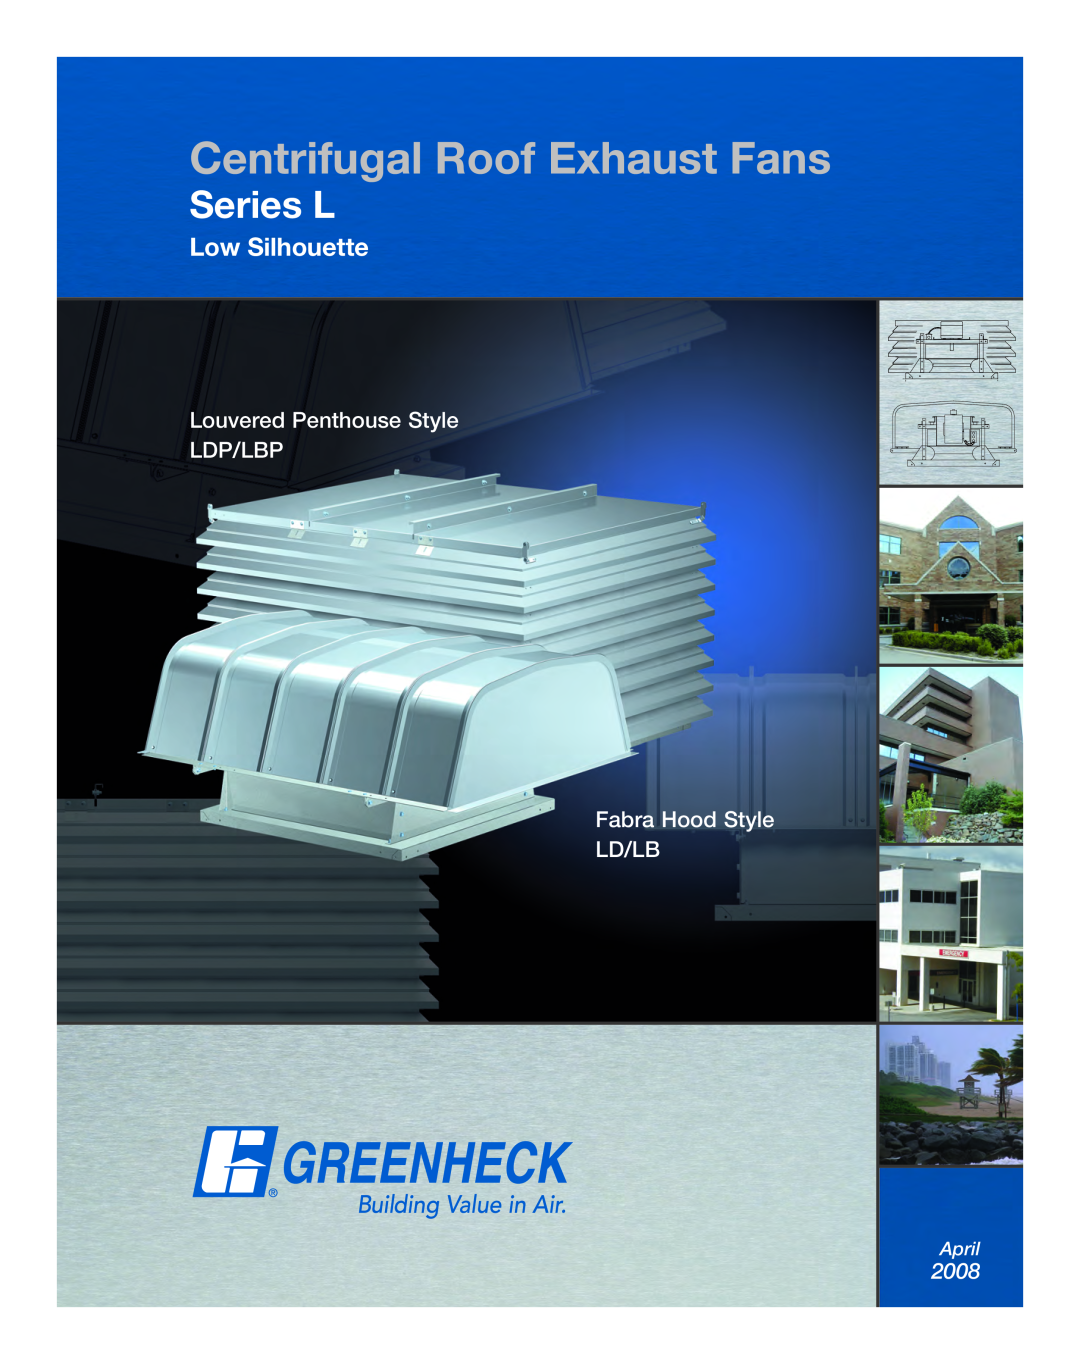 Greenheck Fan Series L manual Centrifugal Roof Exhaust Fans, Low Silhouette, 2008, April 